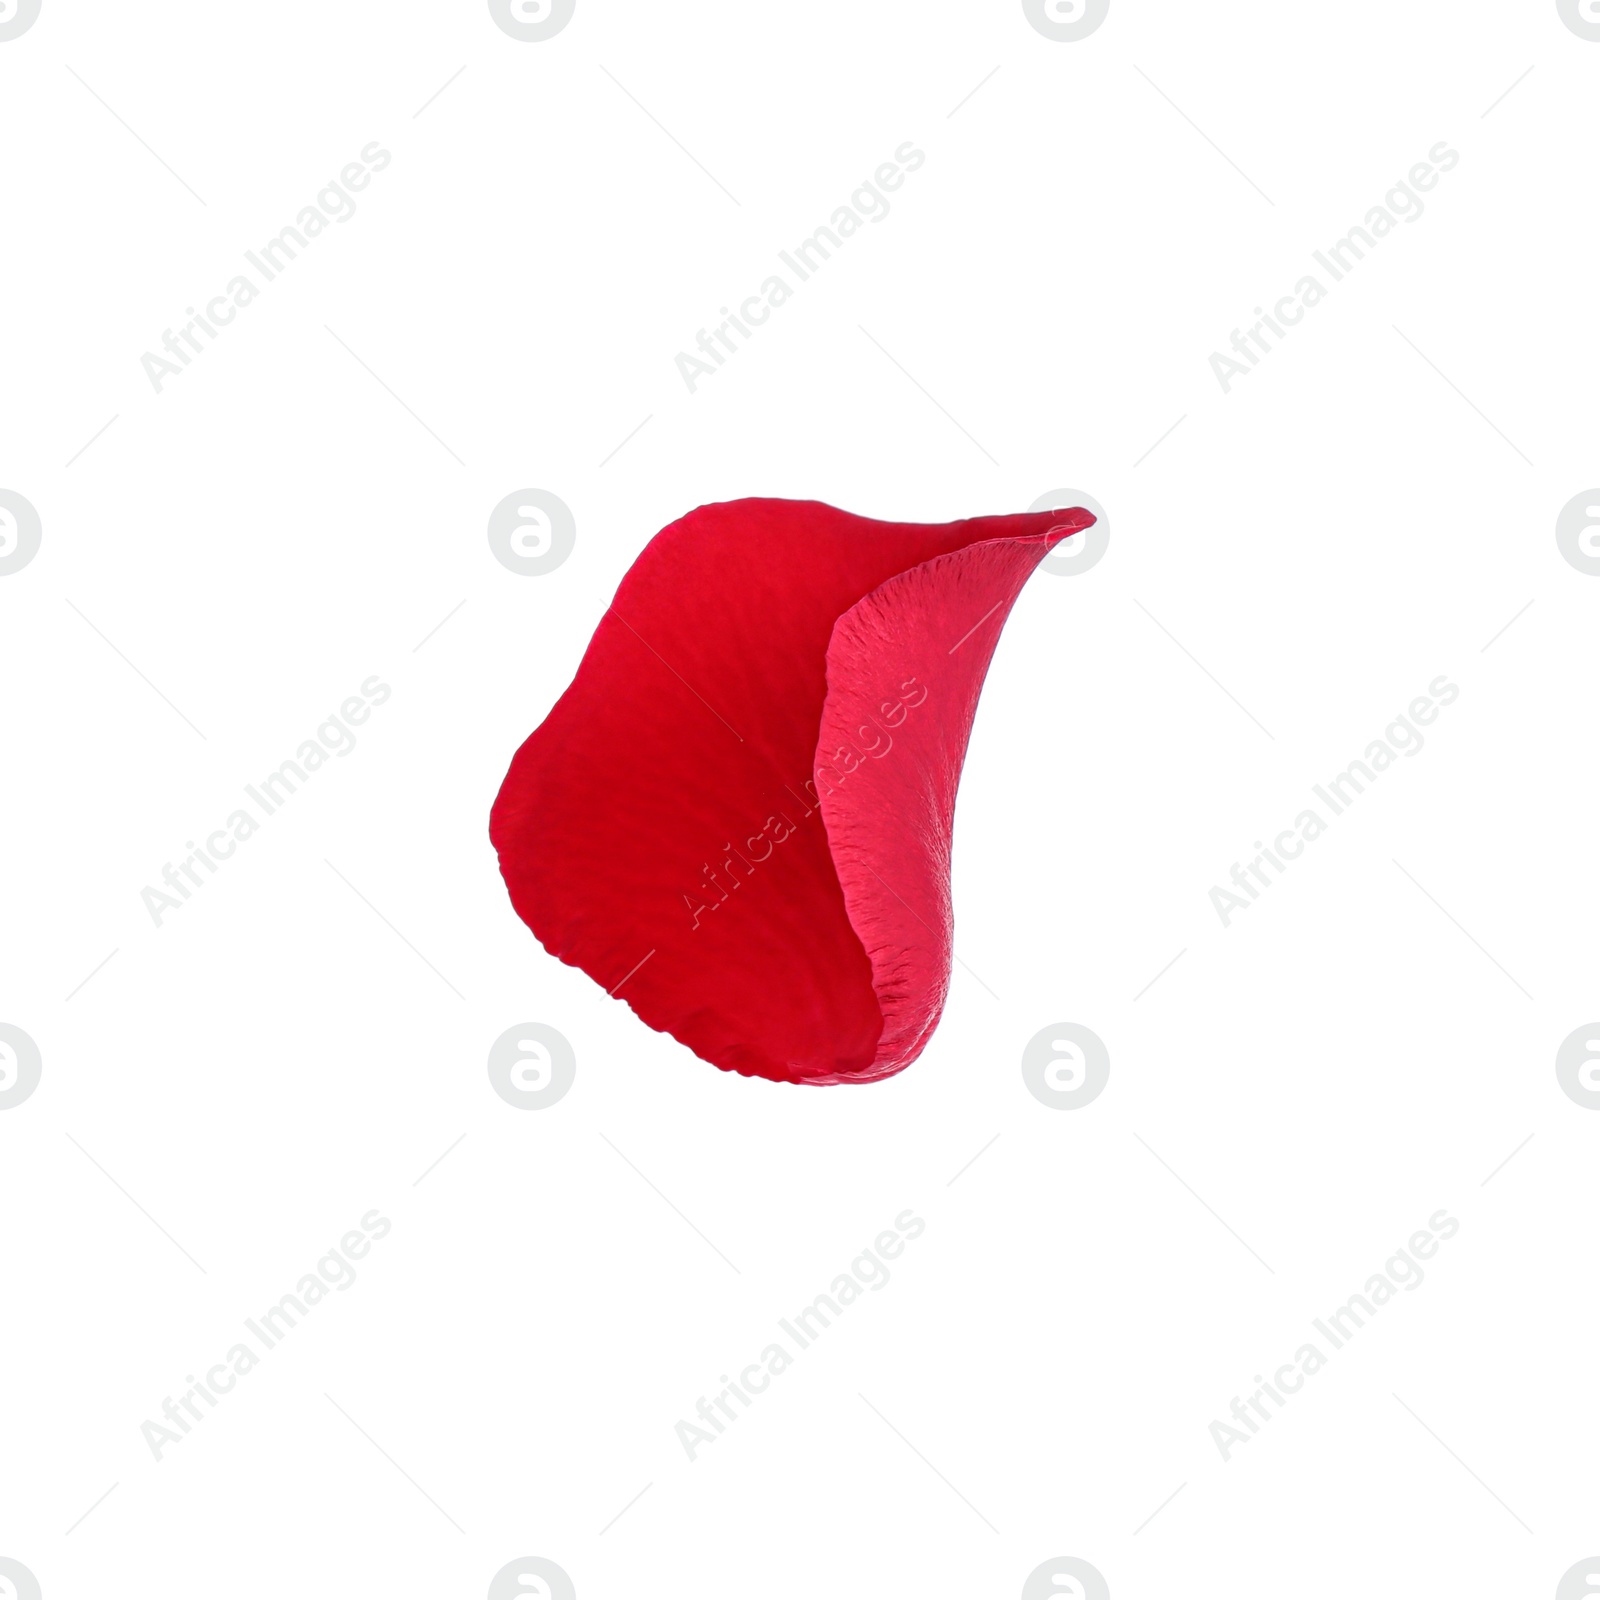 Photo of Bright red rose petal isolated on white